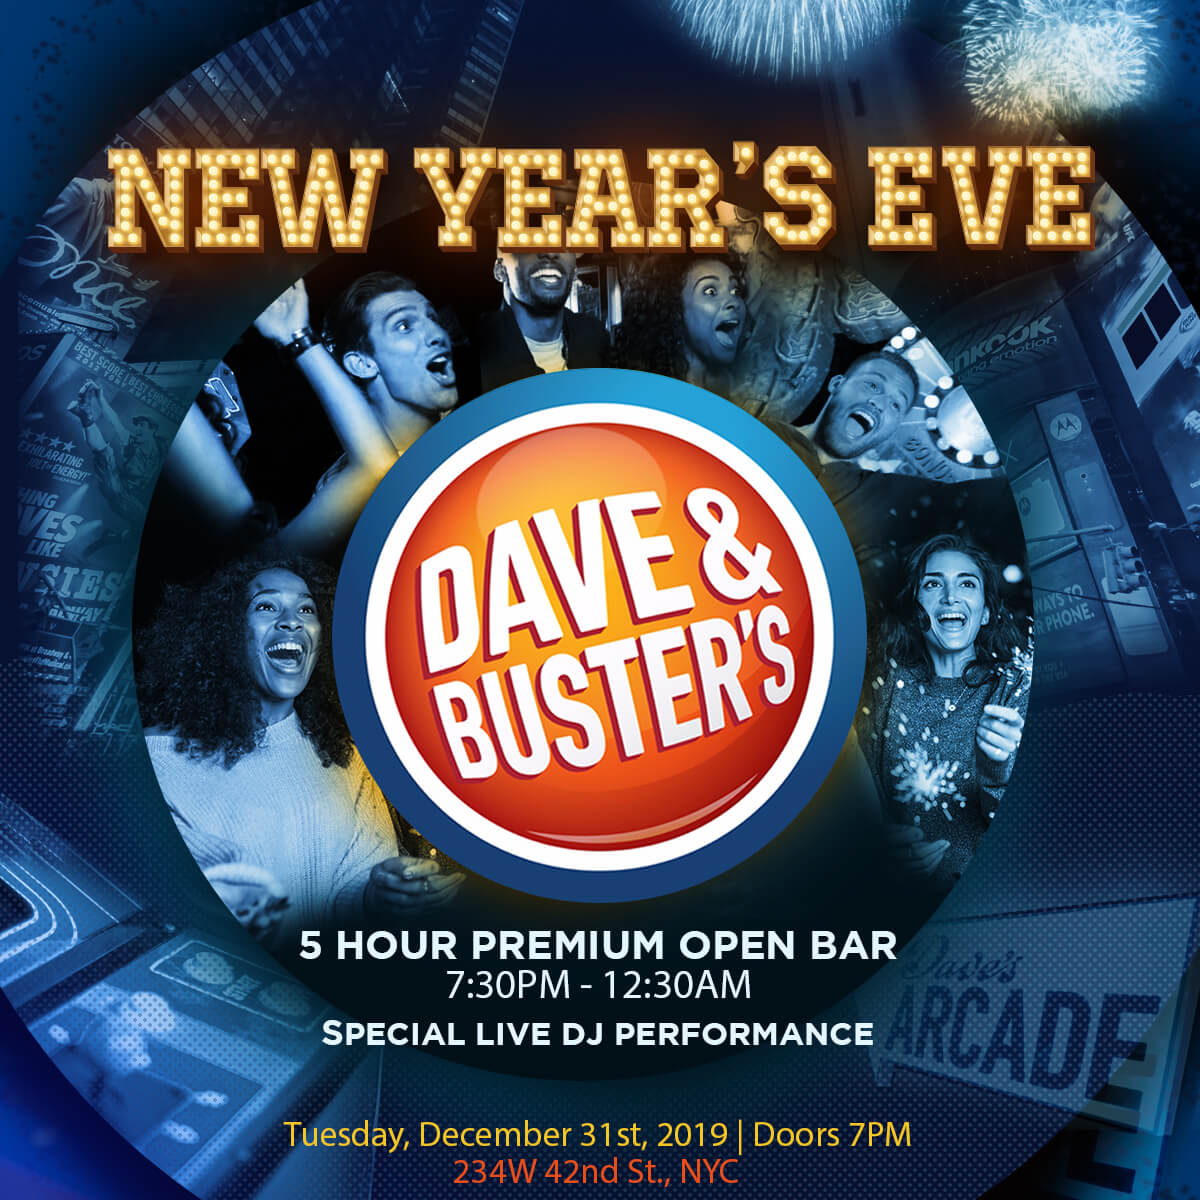 dave and busters specials groupon